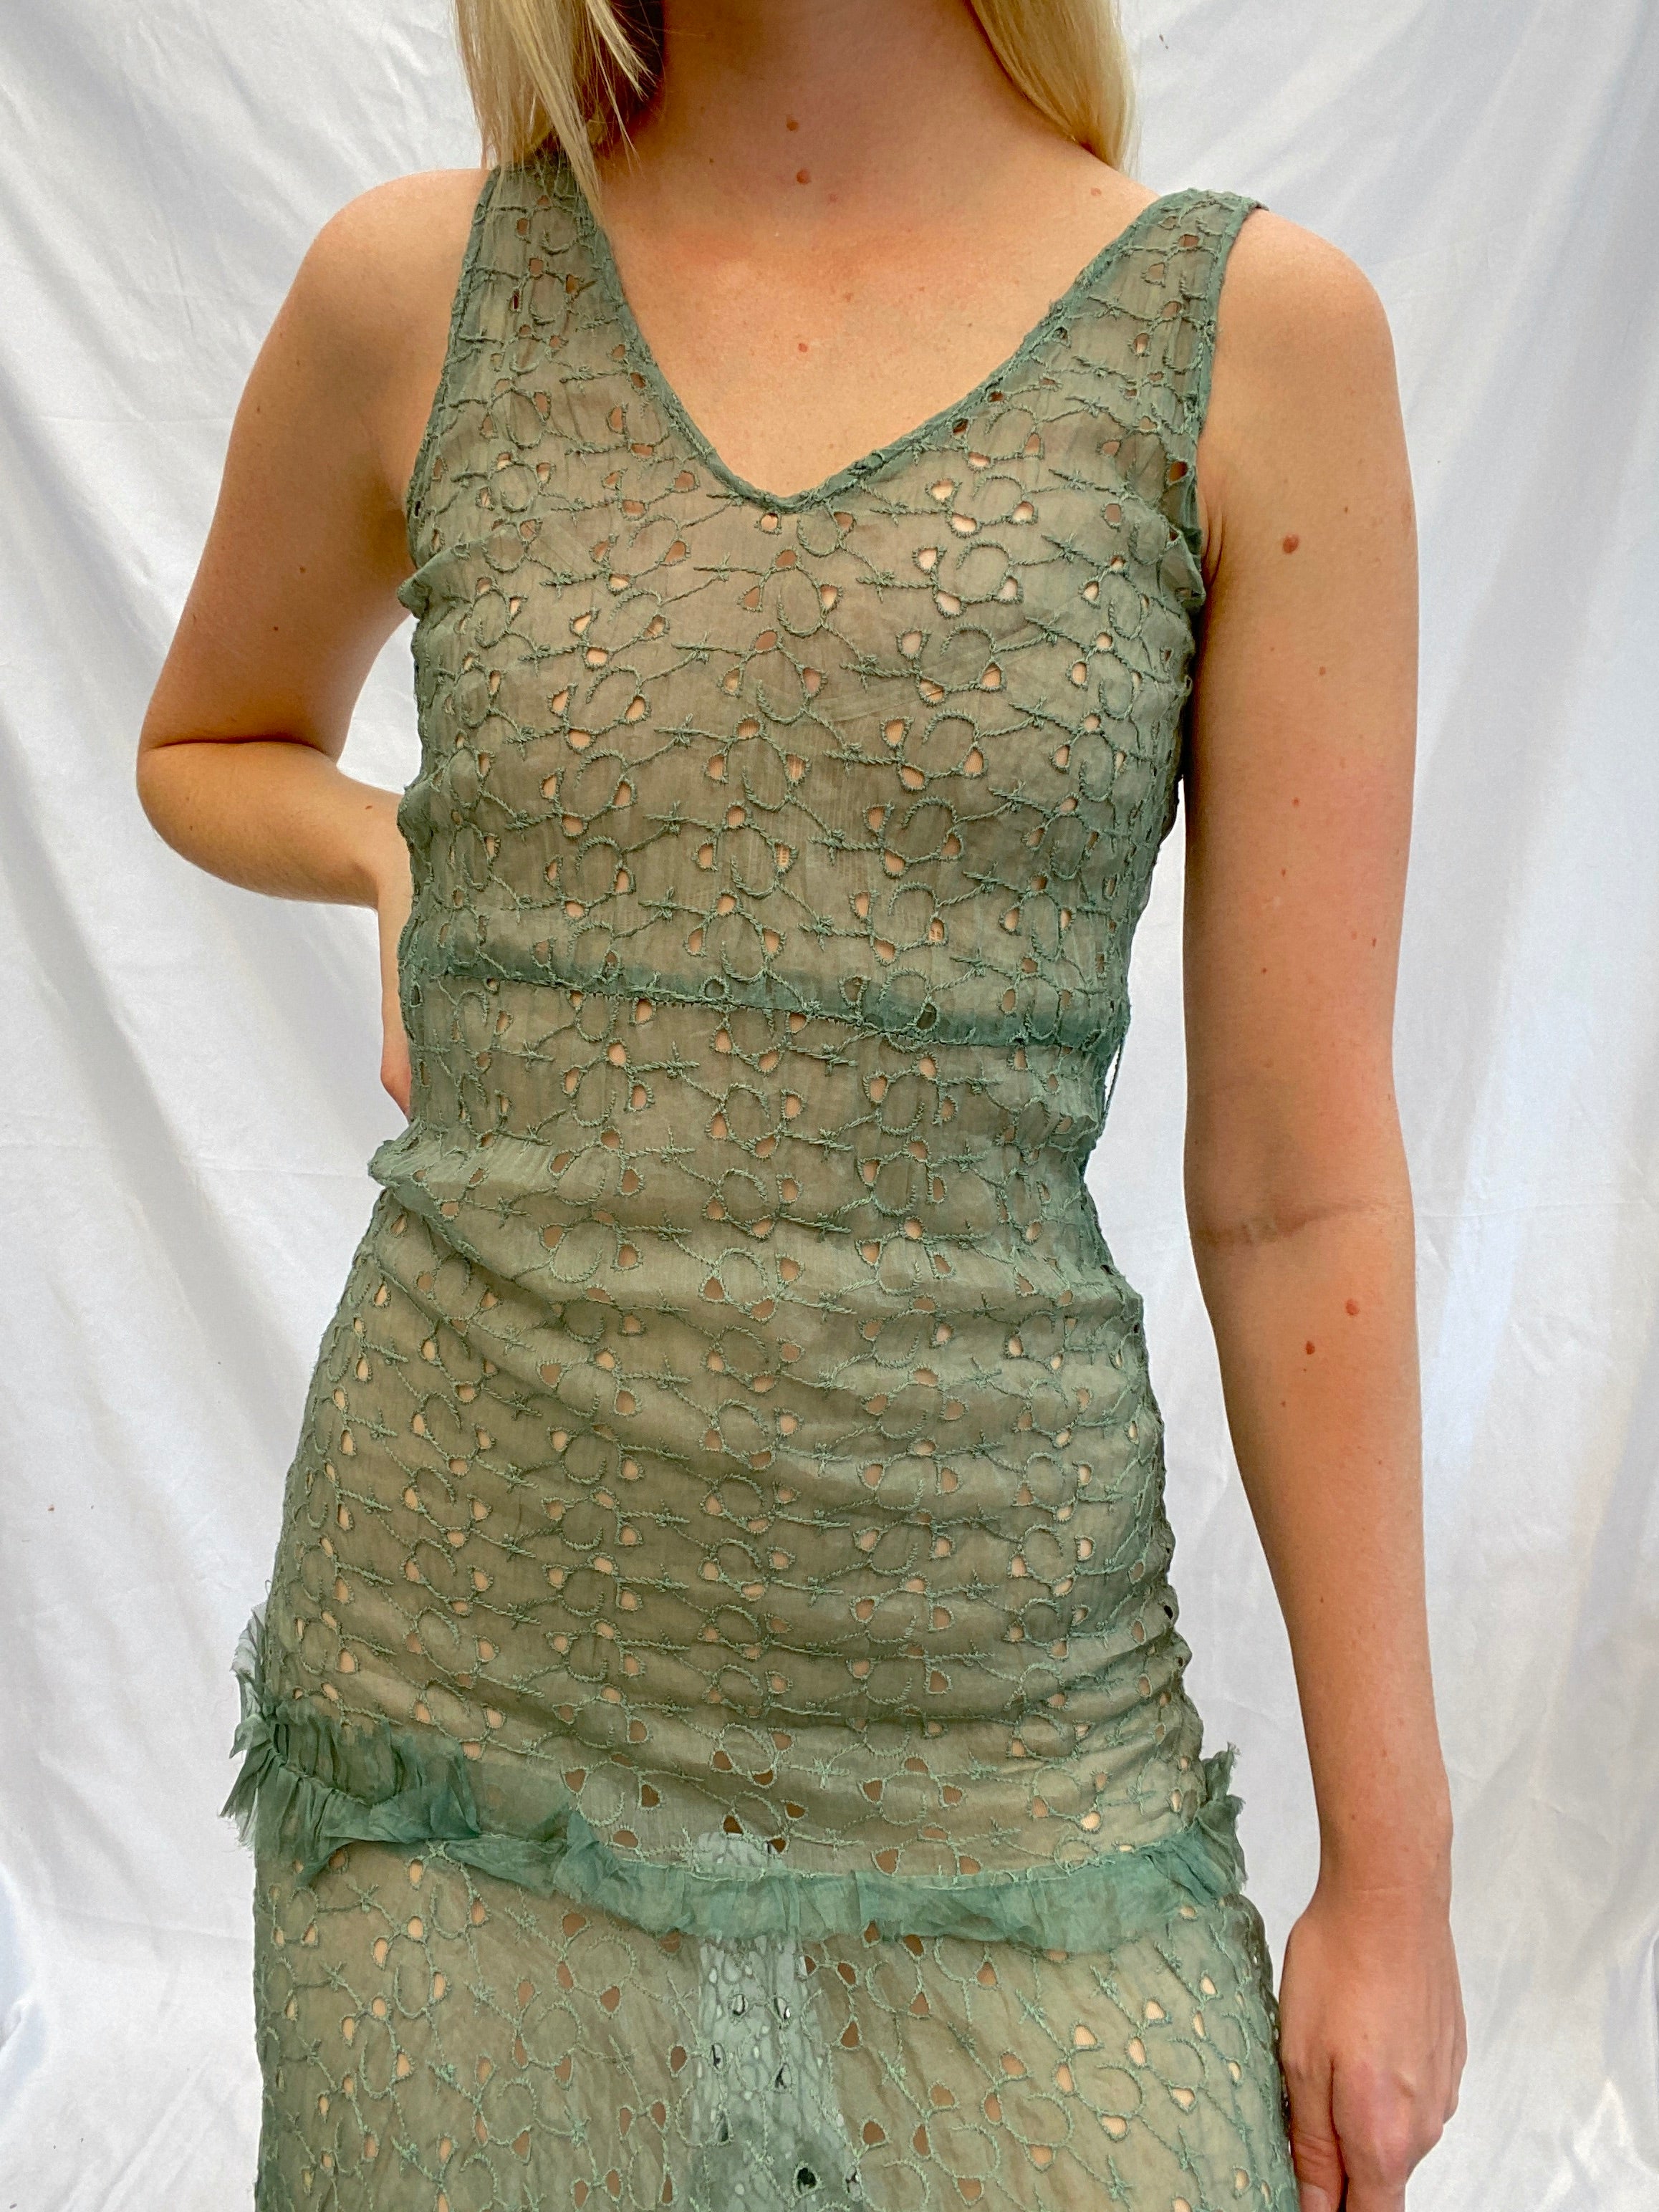 Hand Dyed Army Green Eyelet Dress